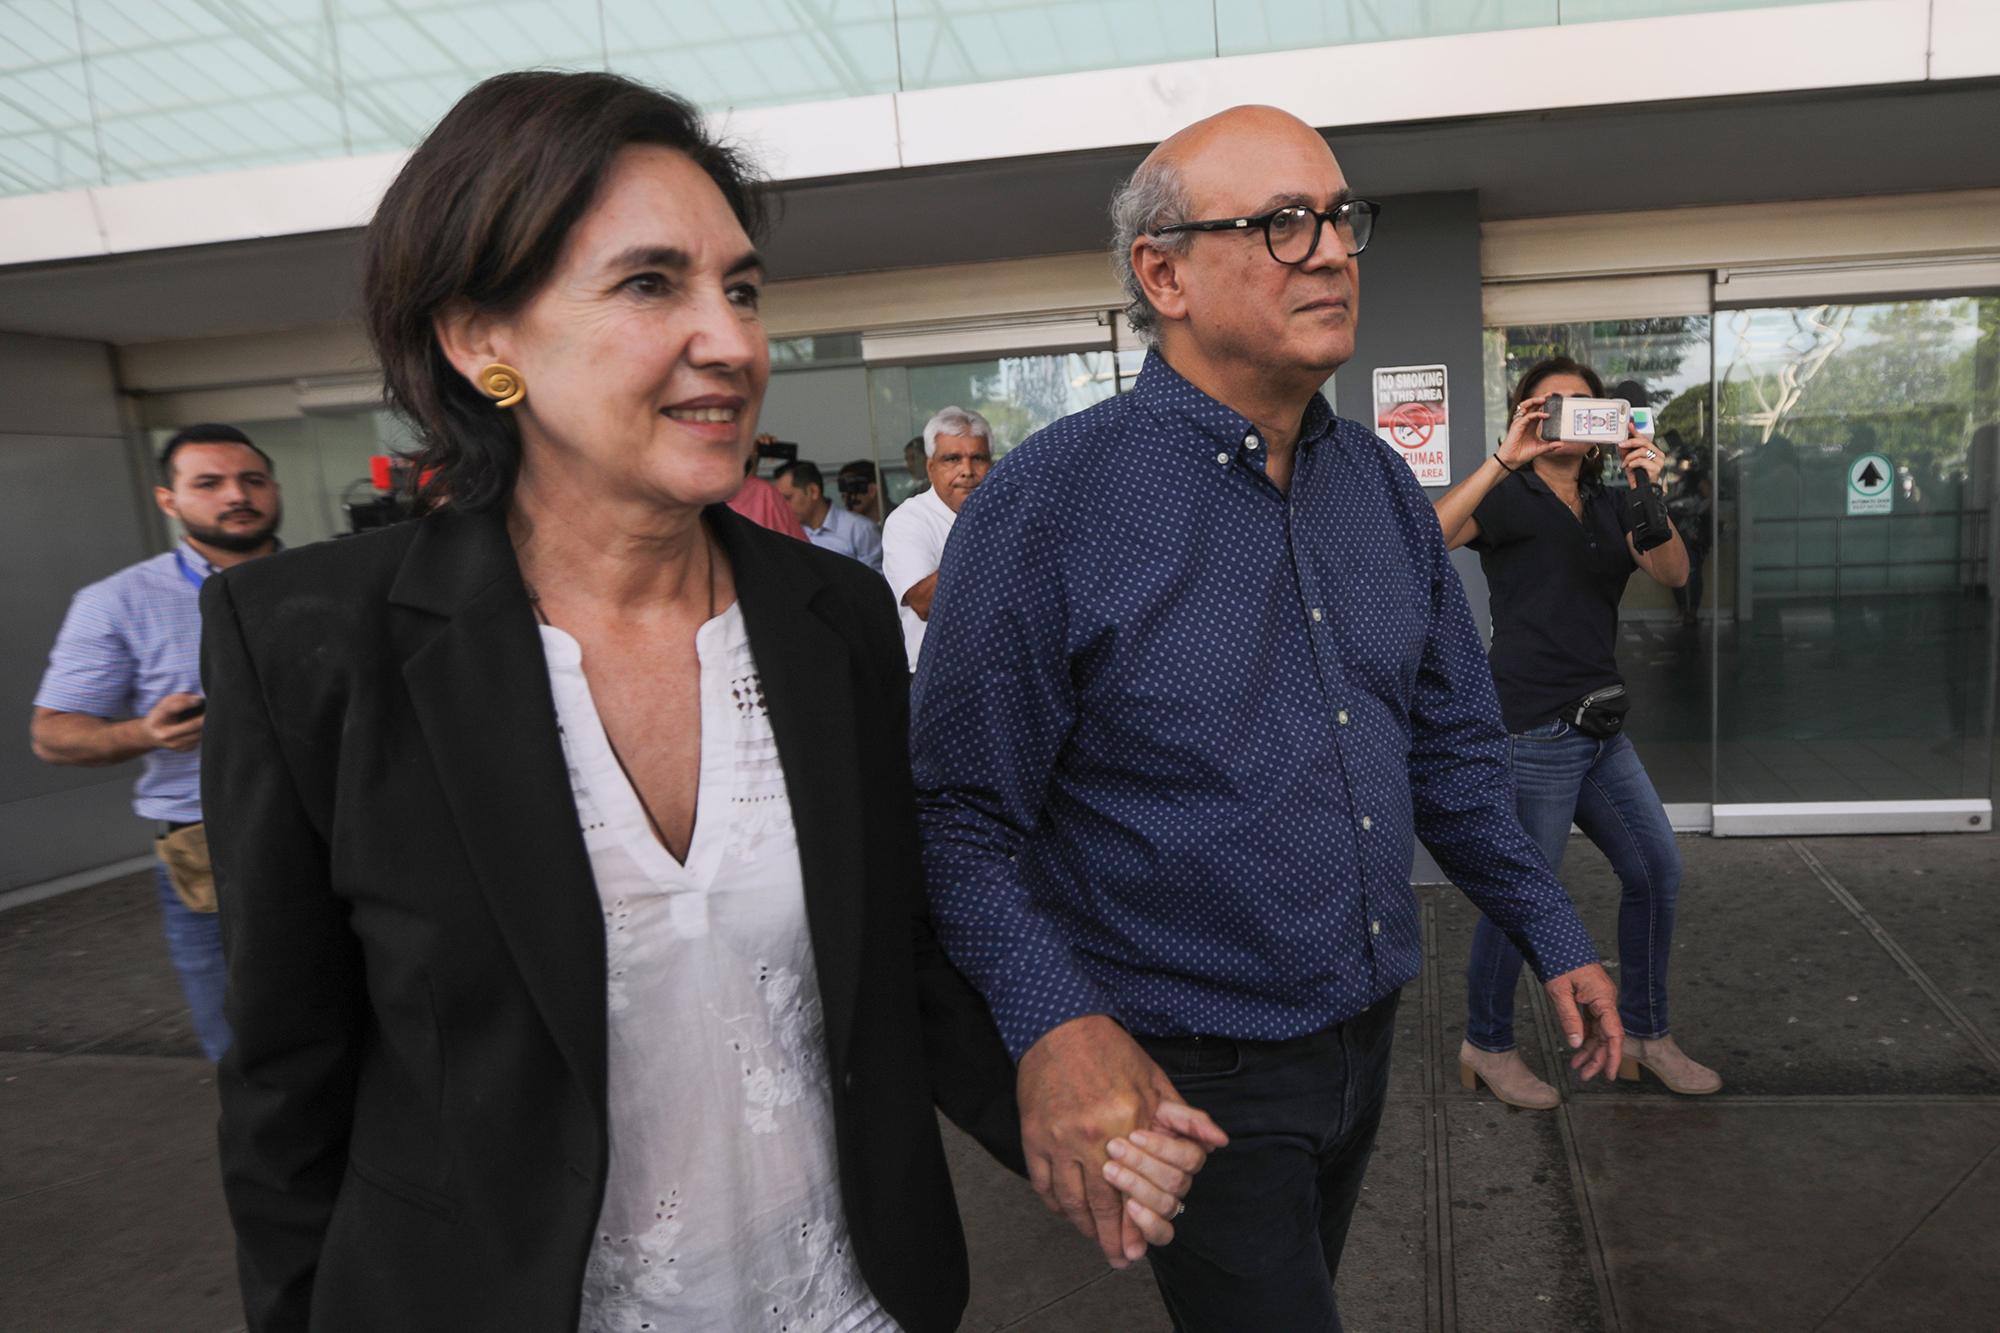 Nicaraguan journalist Carlos Fernando Chamorro (R), critic of the government of President Daniel Ortega, and his wife Desiree Elizondo, are pictured at the airport in Managua on November 25, 2019 after returning from Costa Rica where they spent nine months in exile after his offices were raided by members of the National Police. - Chamorro decided to return to his country despite considering that there are still no 